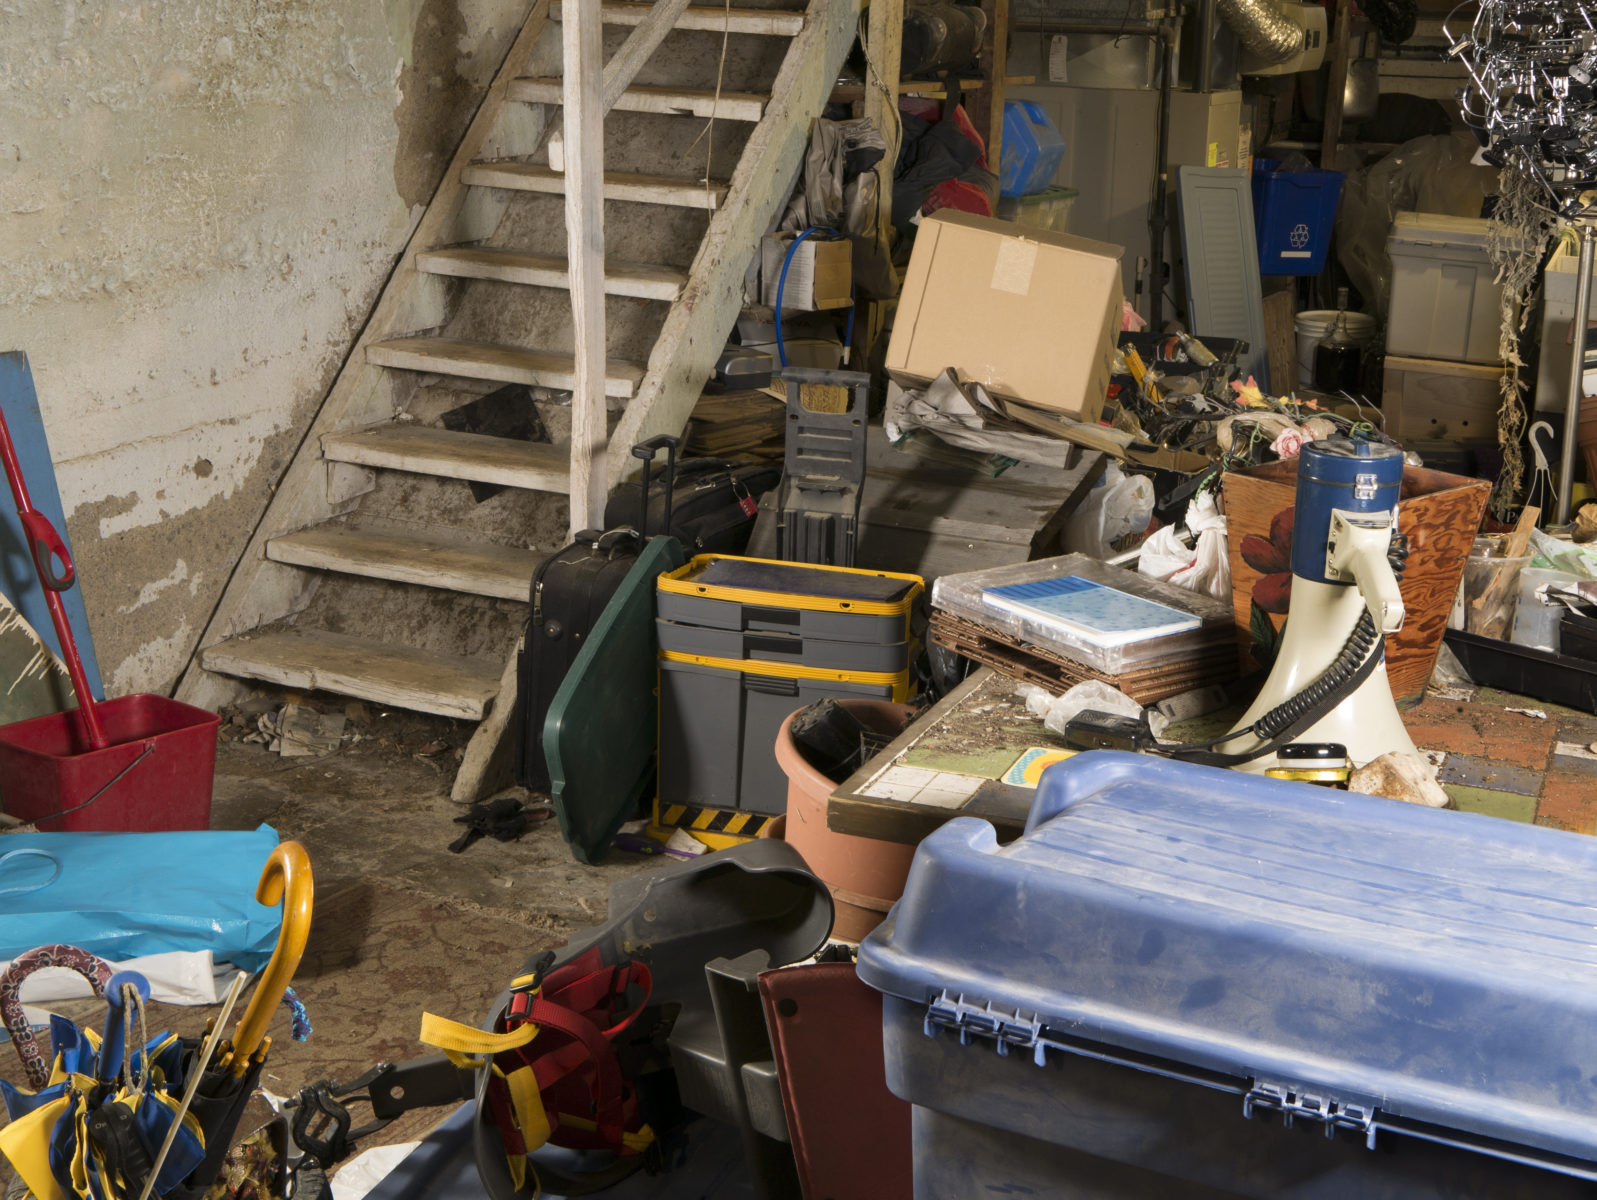 Old dingy residential unfinished basement cluttered with storage of random things